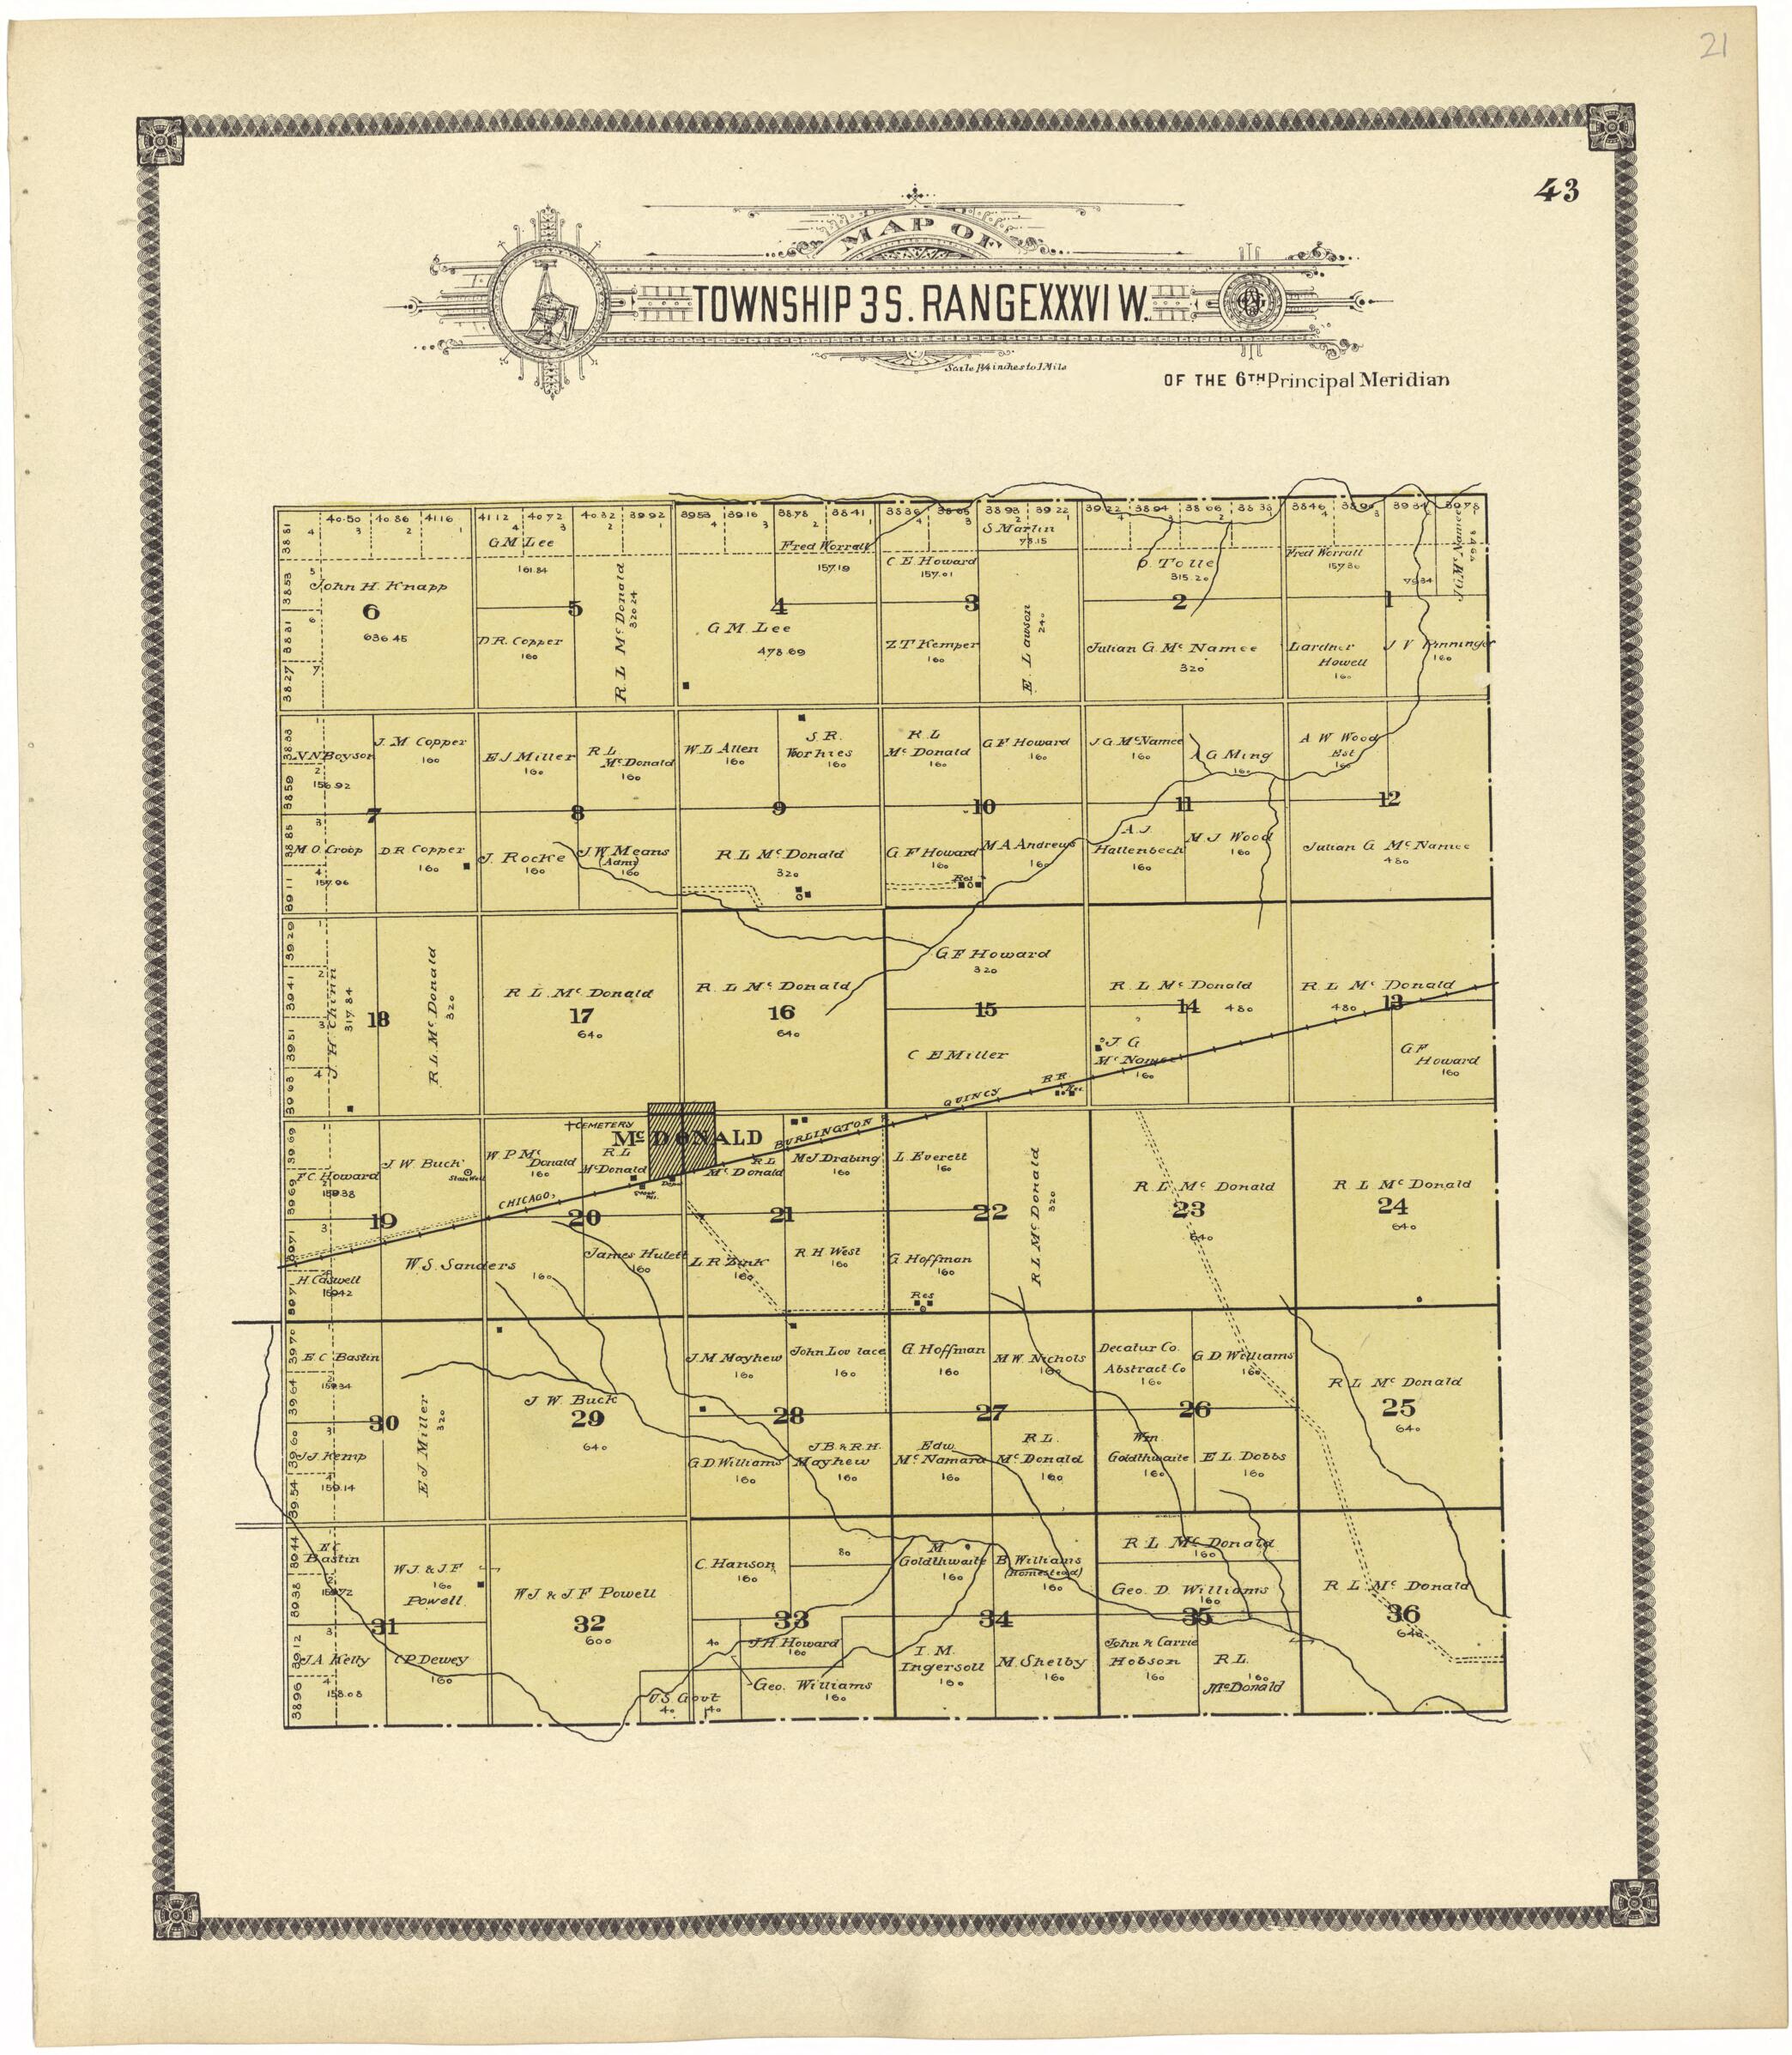 This old map of Map of Township 3 S. Range XXXVI W. from Standard Atlas of Rawlins County, Kansas from 1906 was created by  Geo. A. Ogle &amp; Co in 1906